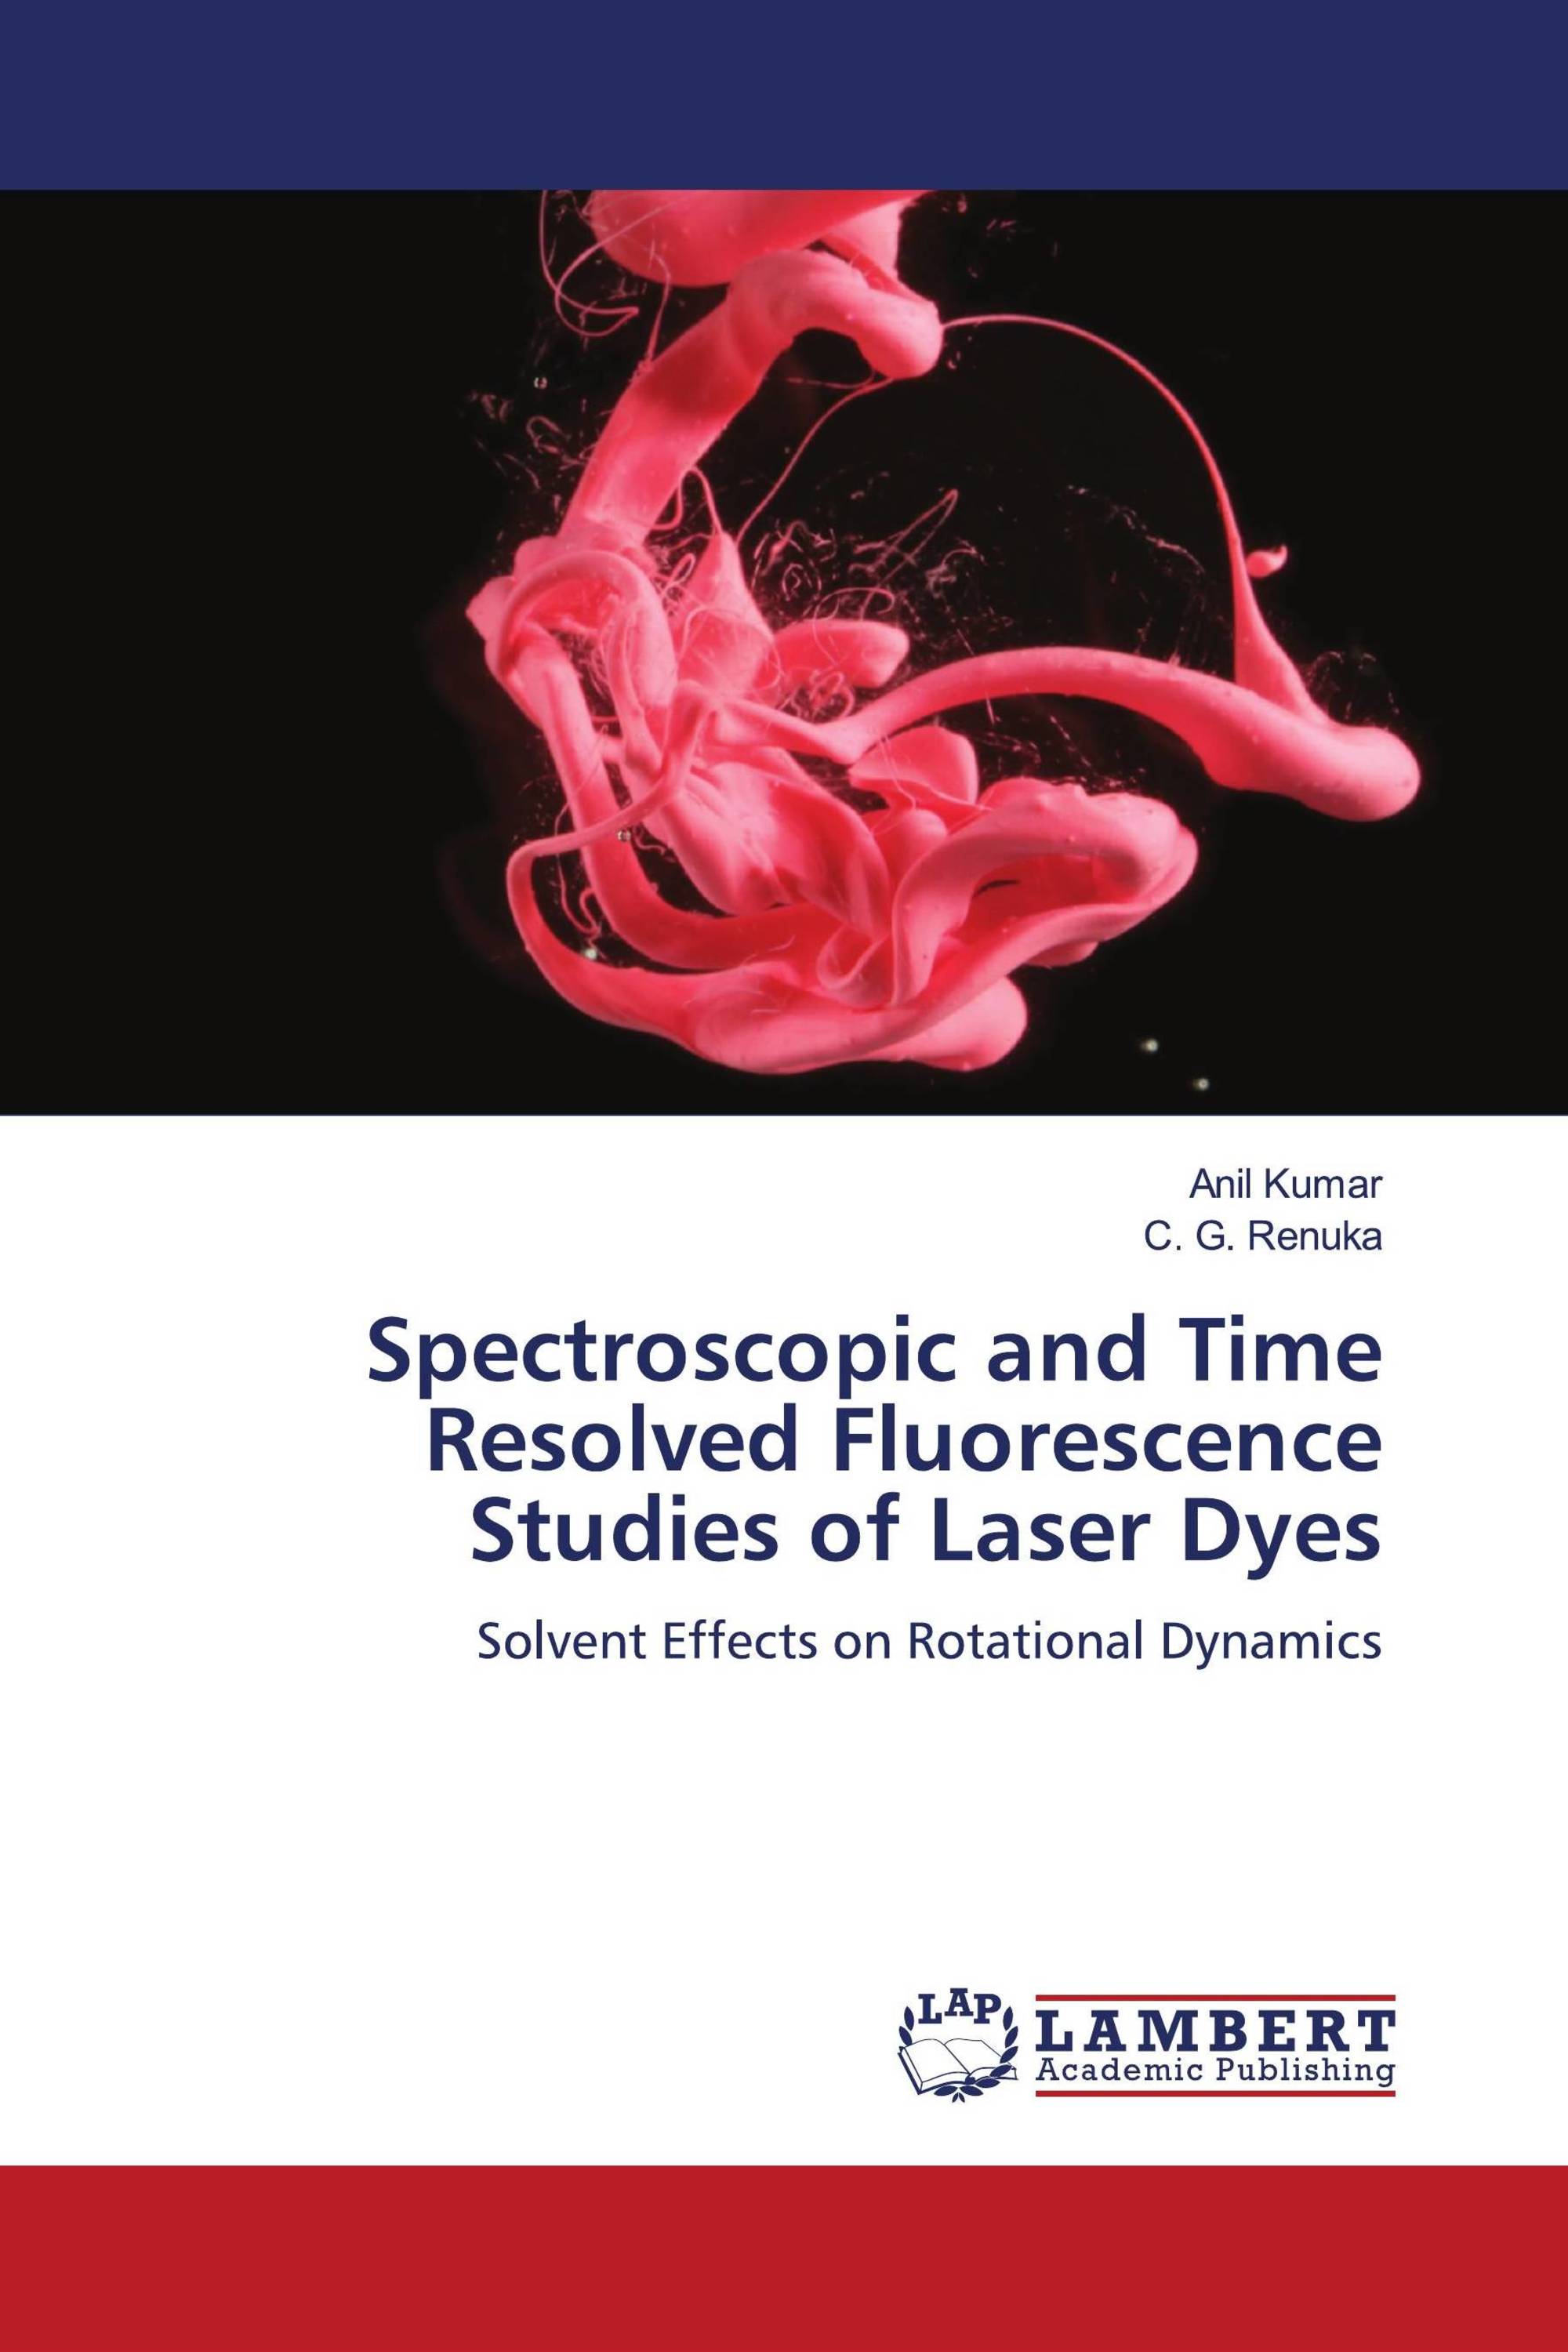 Spectroscopic and Time Resolved Fluorescence Studies of Laser Dyes